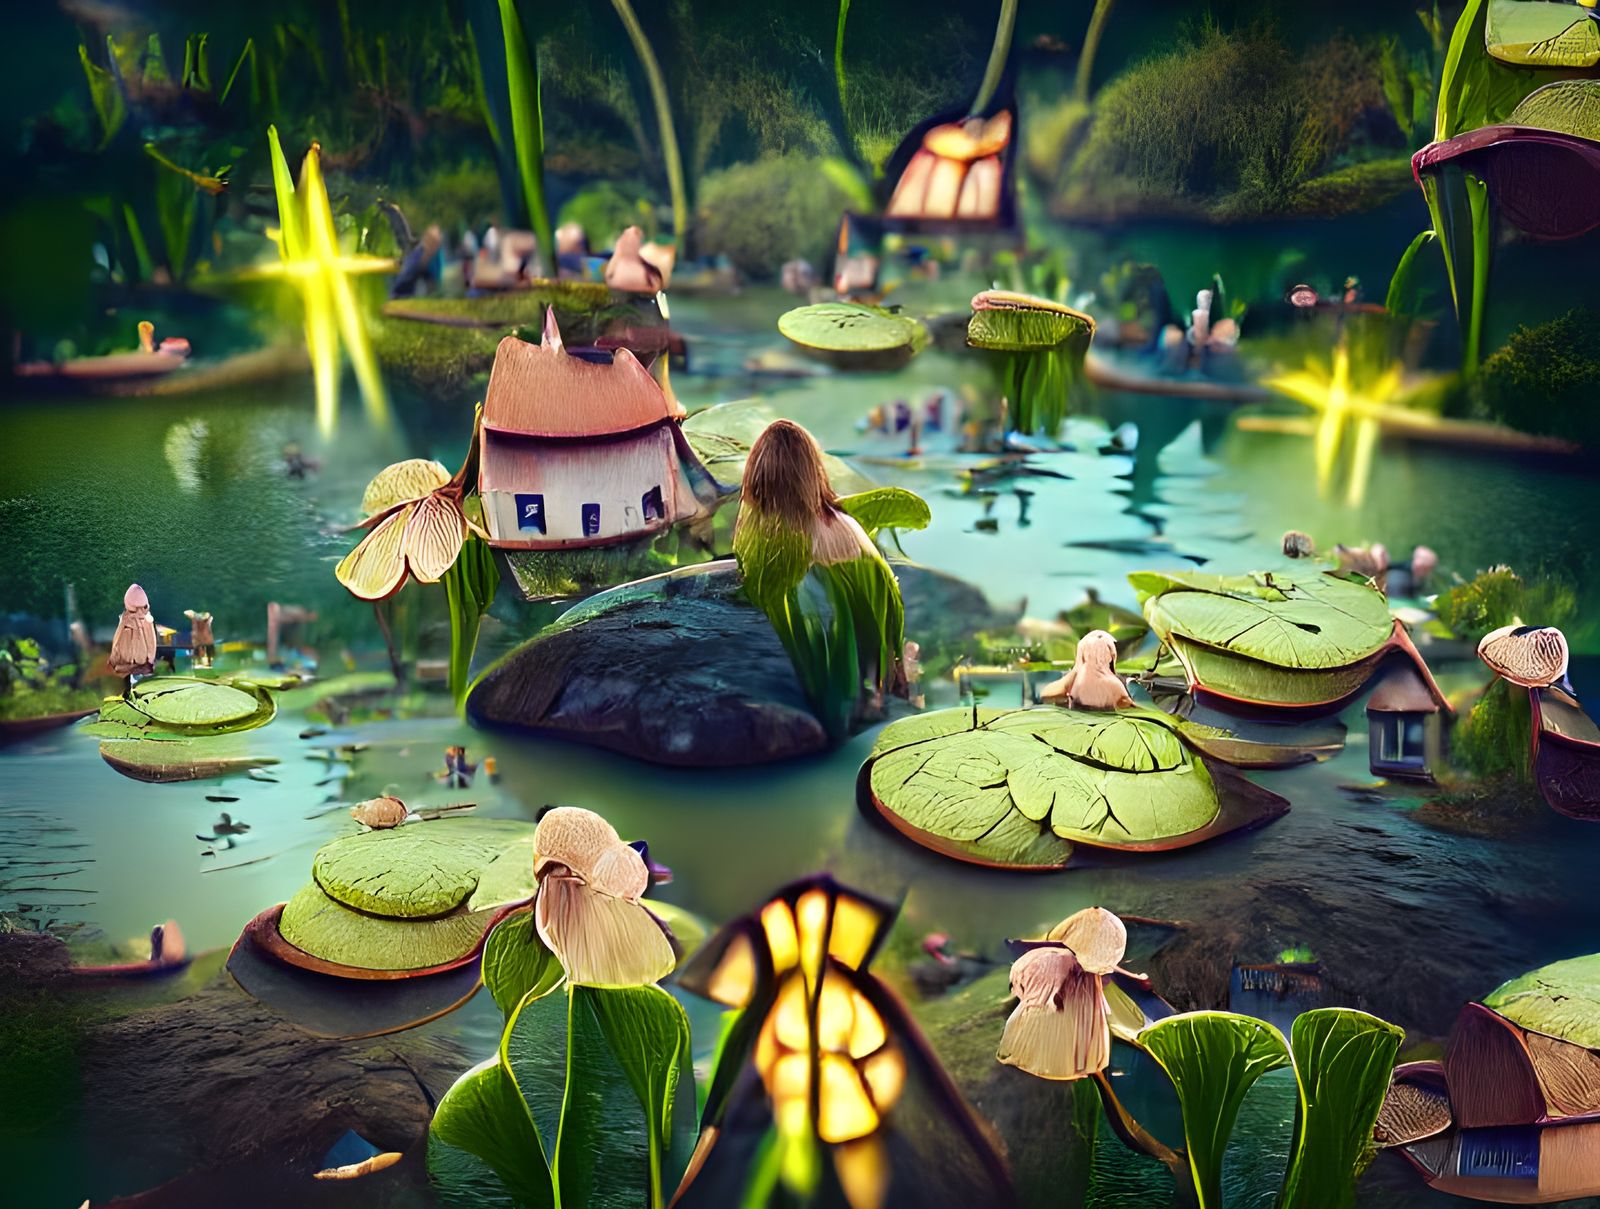 Fairy village on lily pads